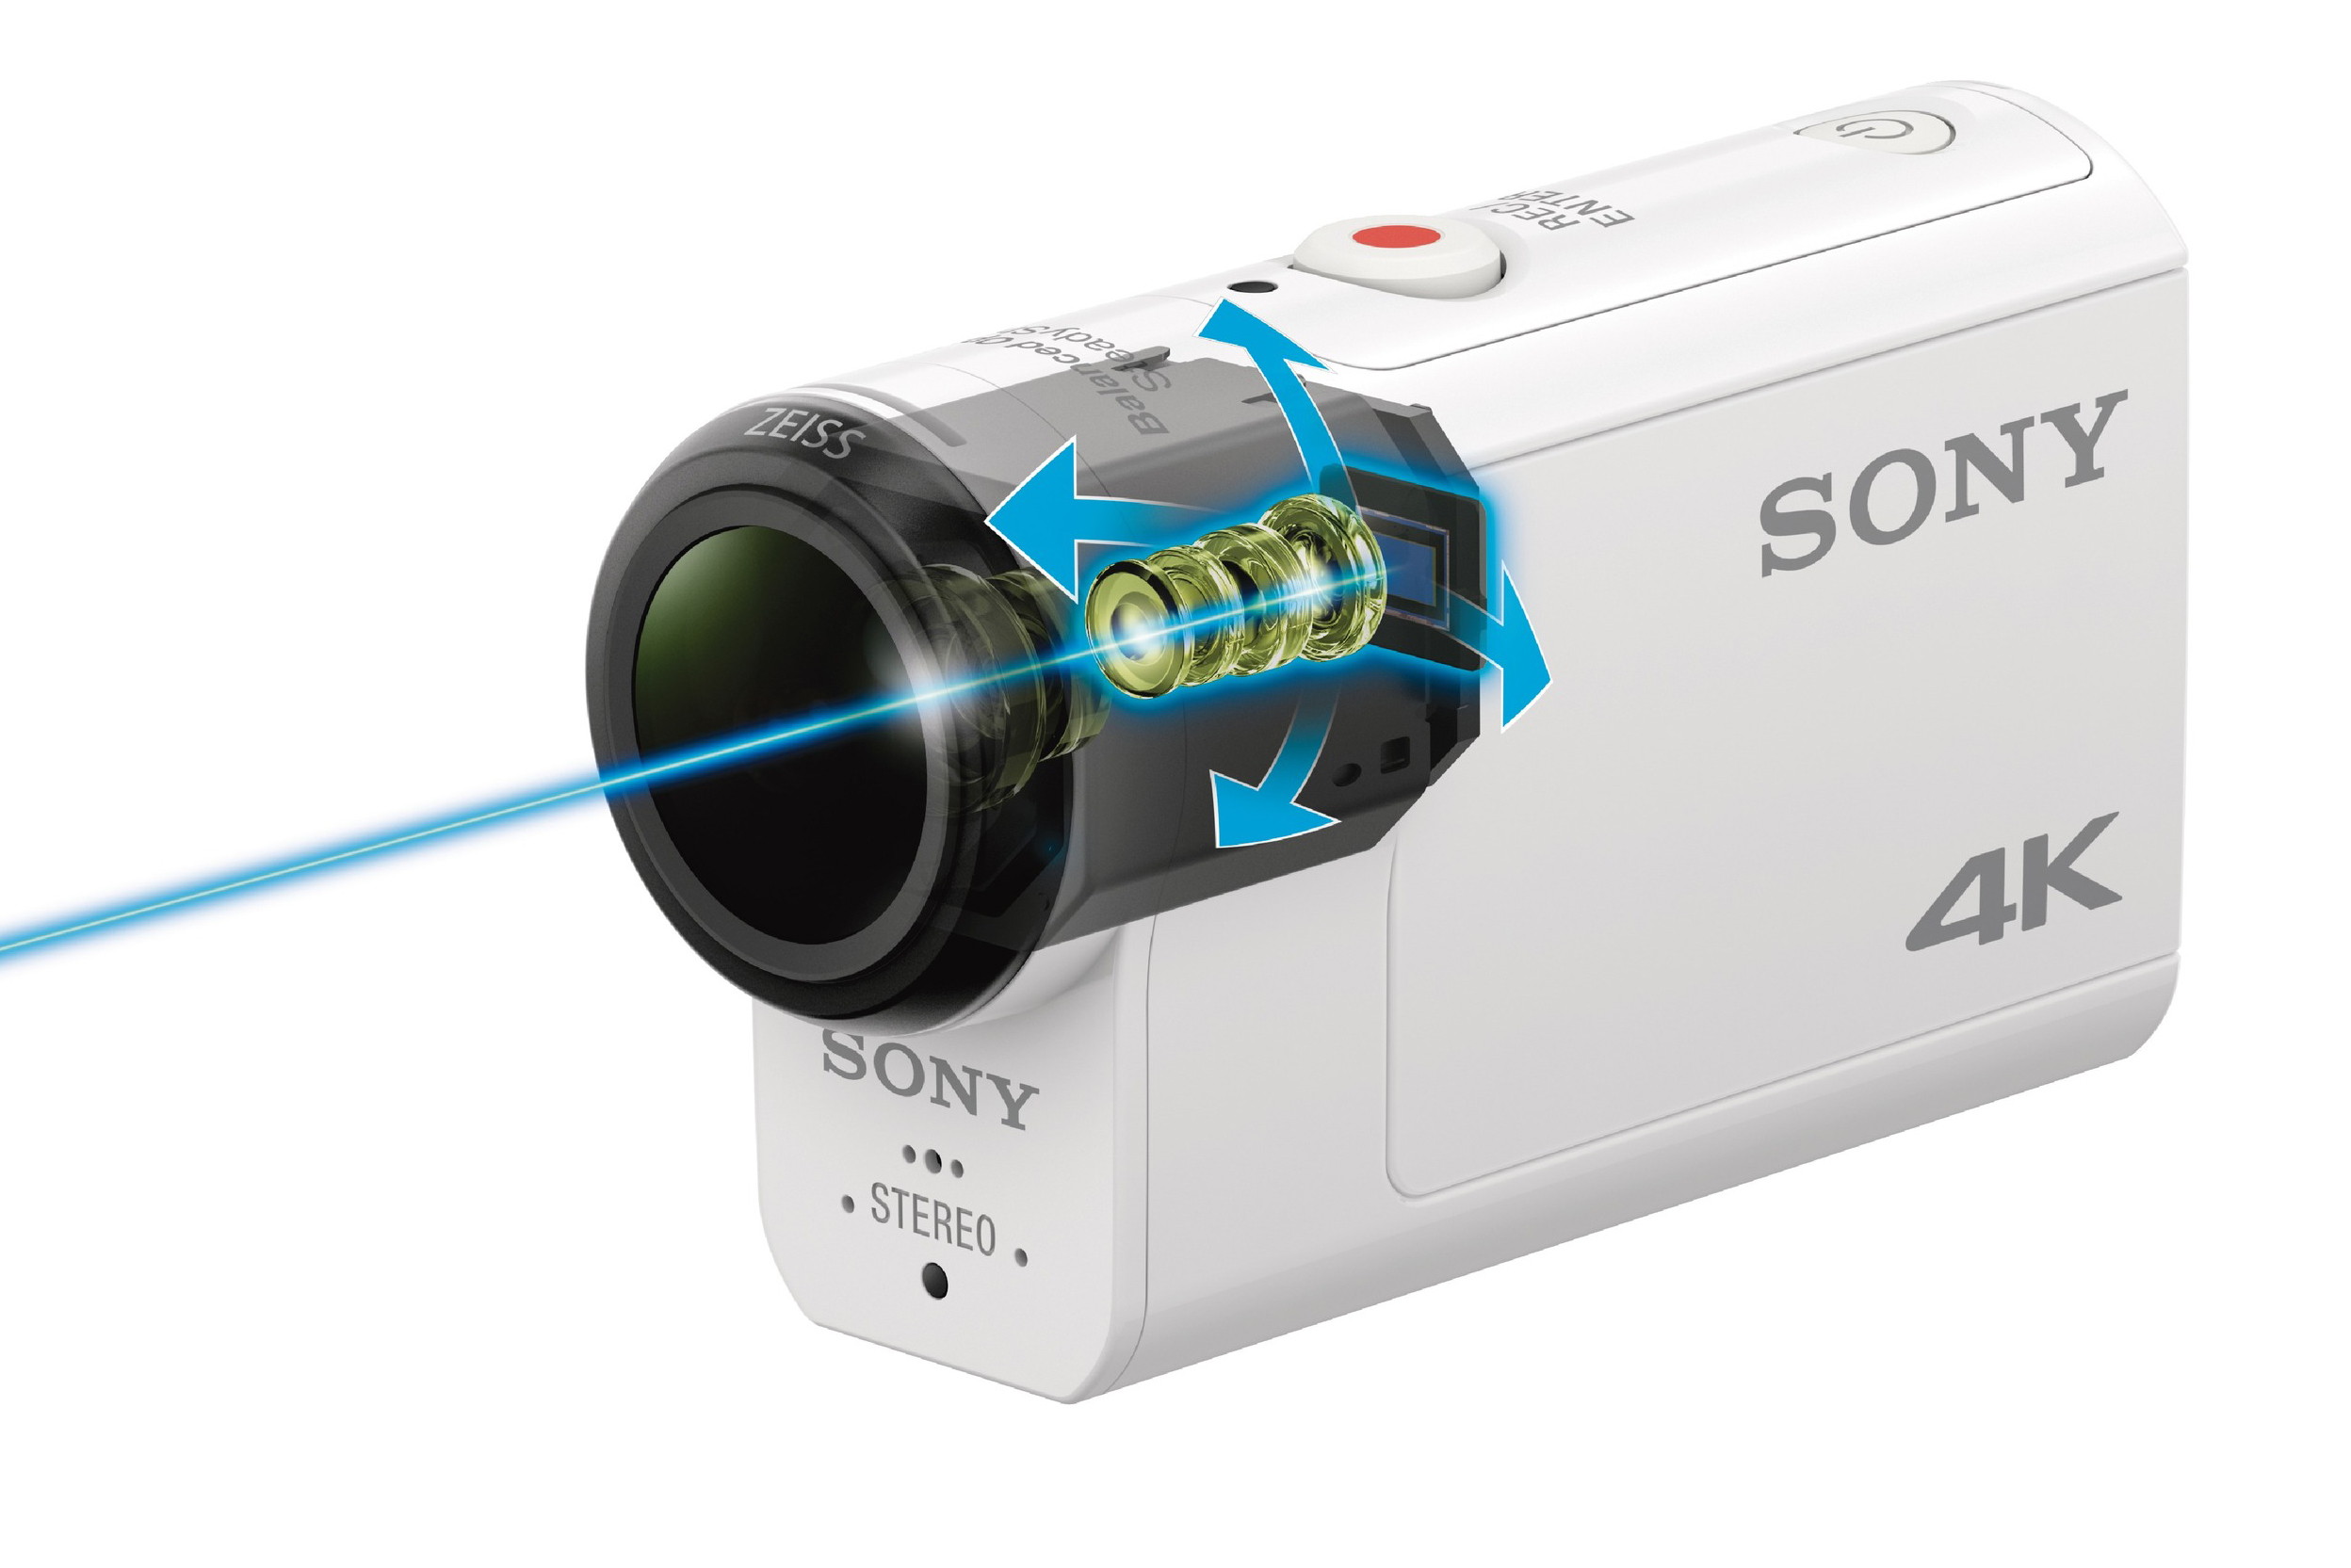 Sony Action Cam FDR-X3000 review: Sony X3000R, AS300R brings 